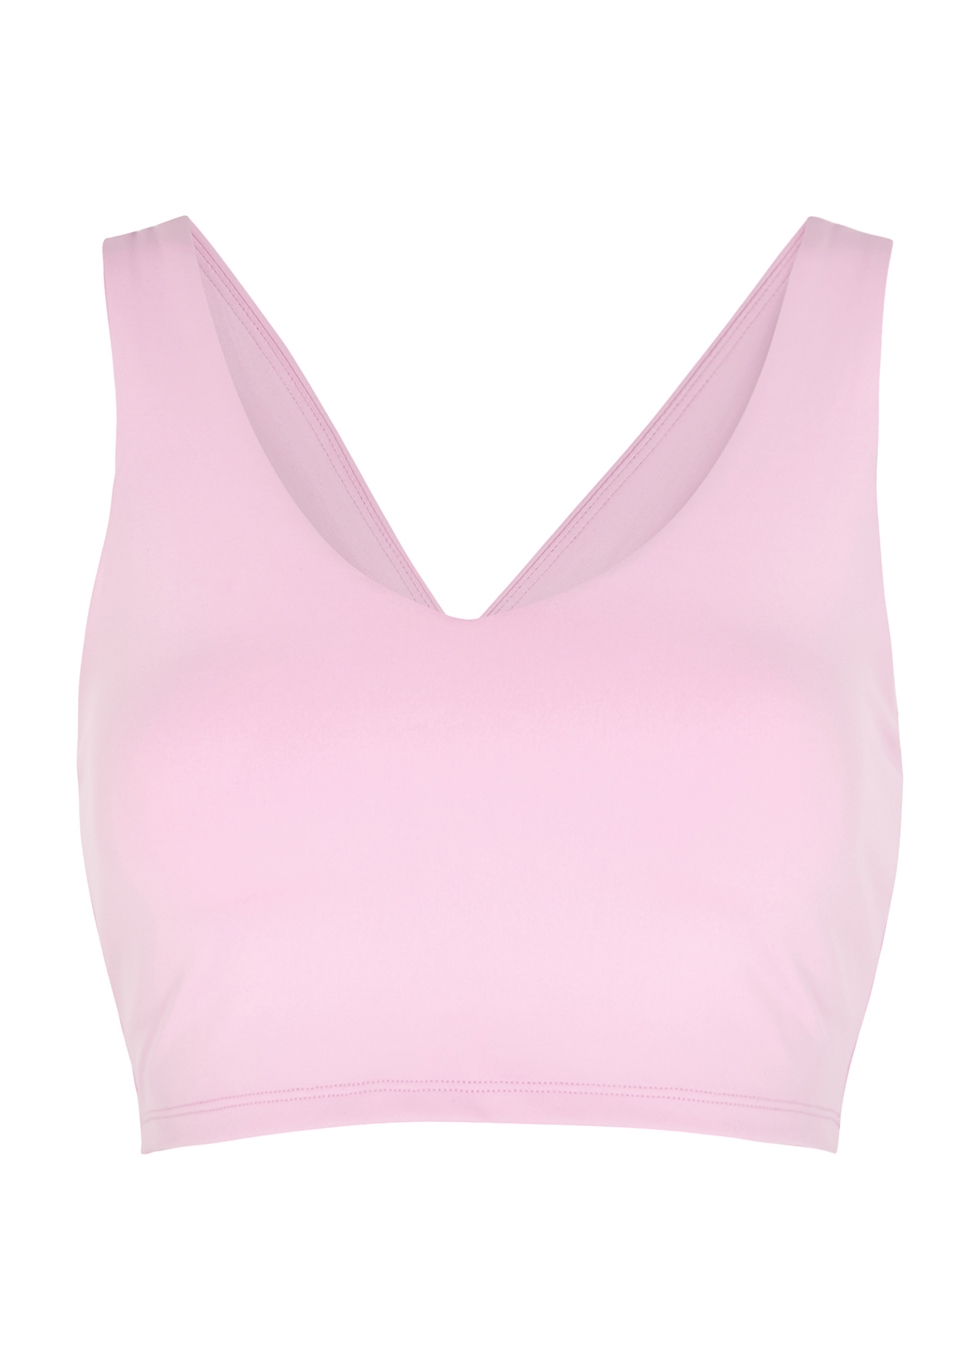 Full Count lilac sports bra